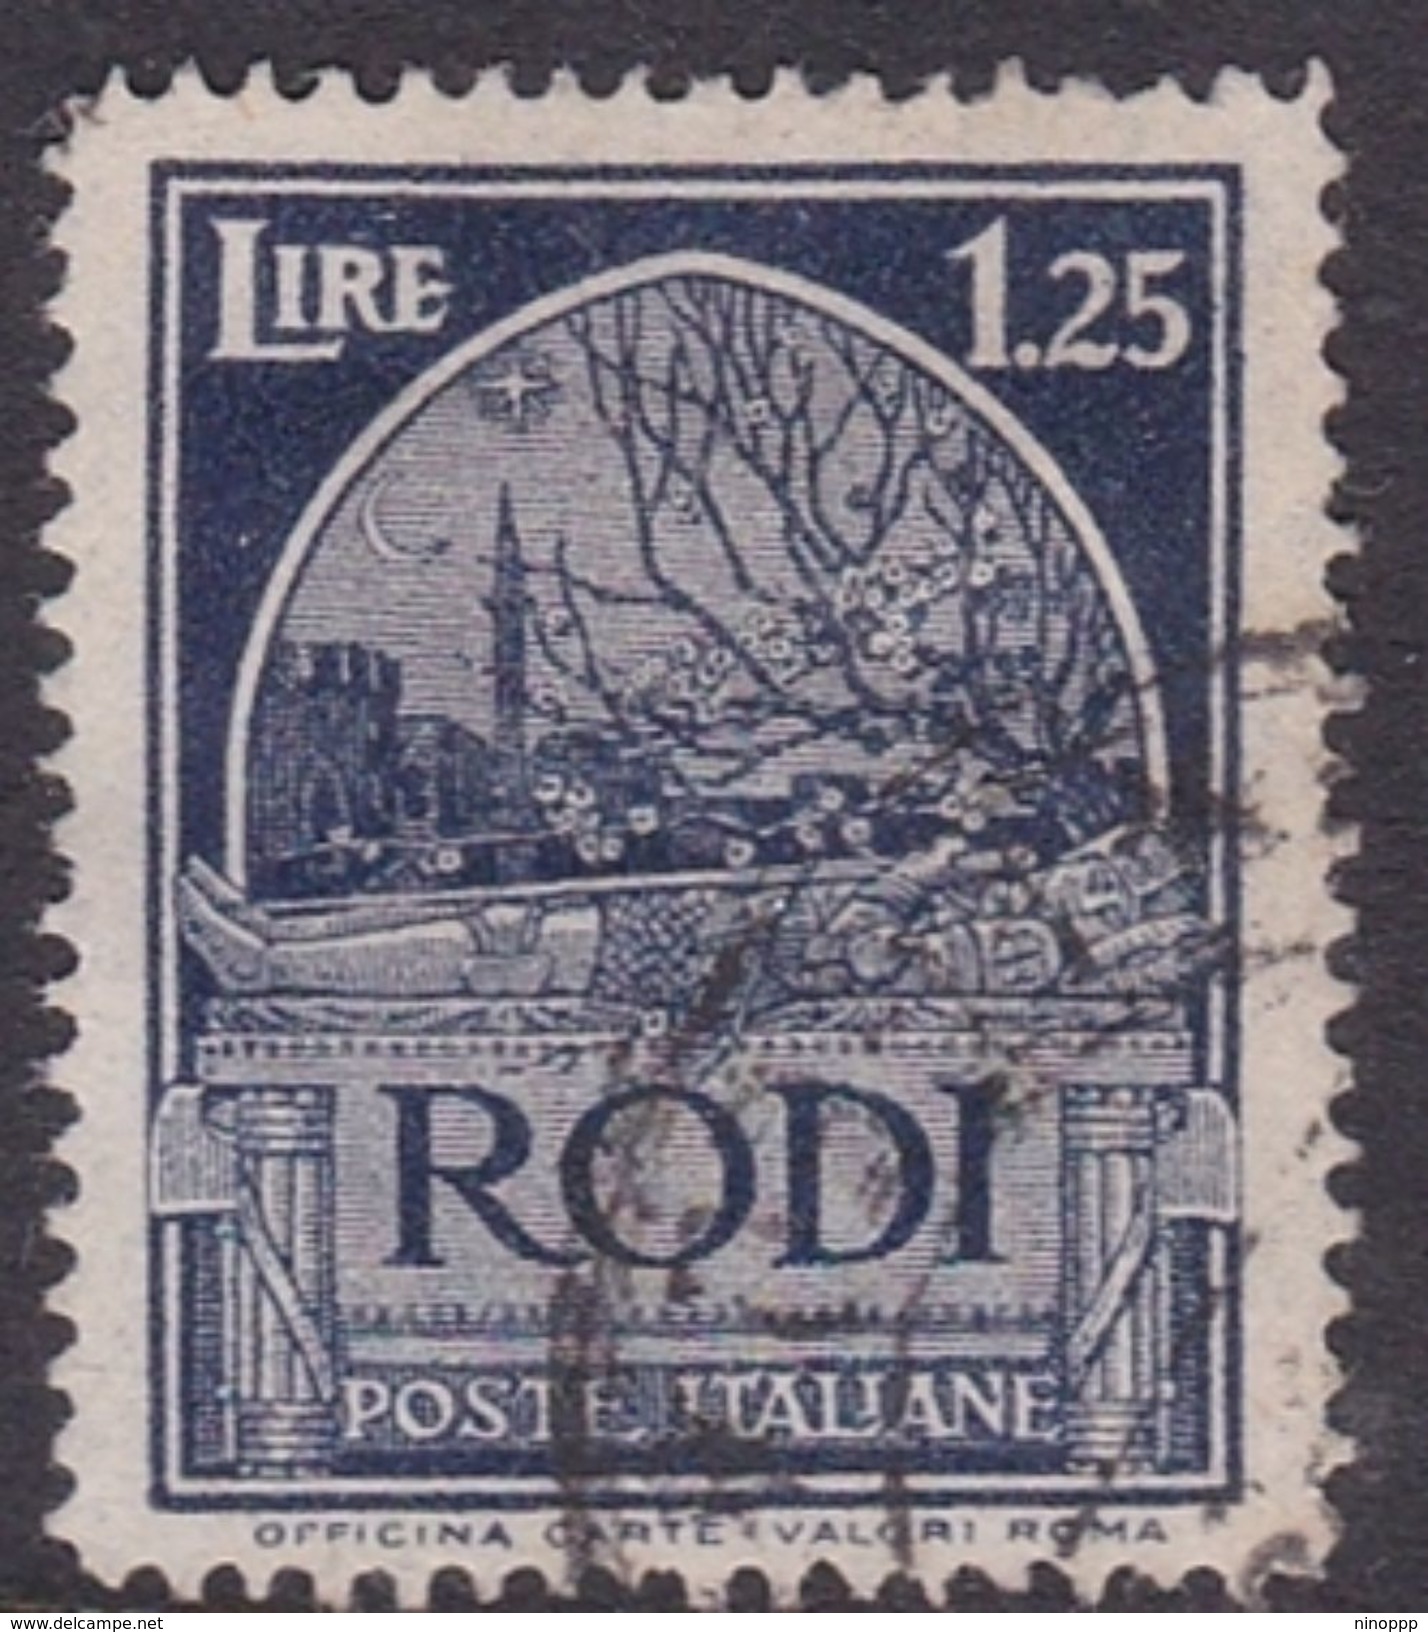 Italy-Colonies And Territories-Aegean General Issue-Rodi S62 1932 Pictorials Perf 14 Lire 1,25 Blue Used - General Issues